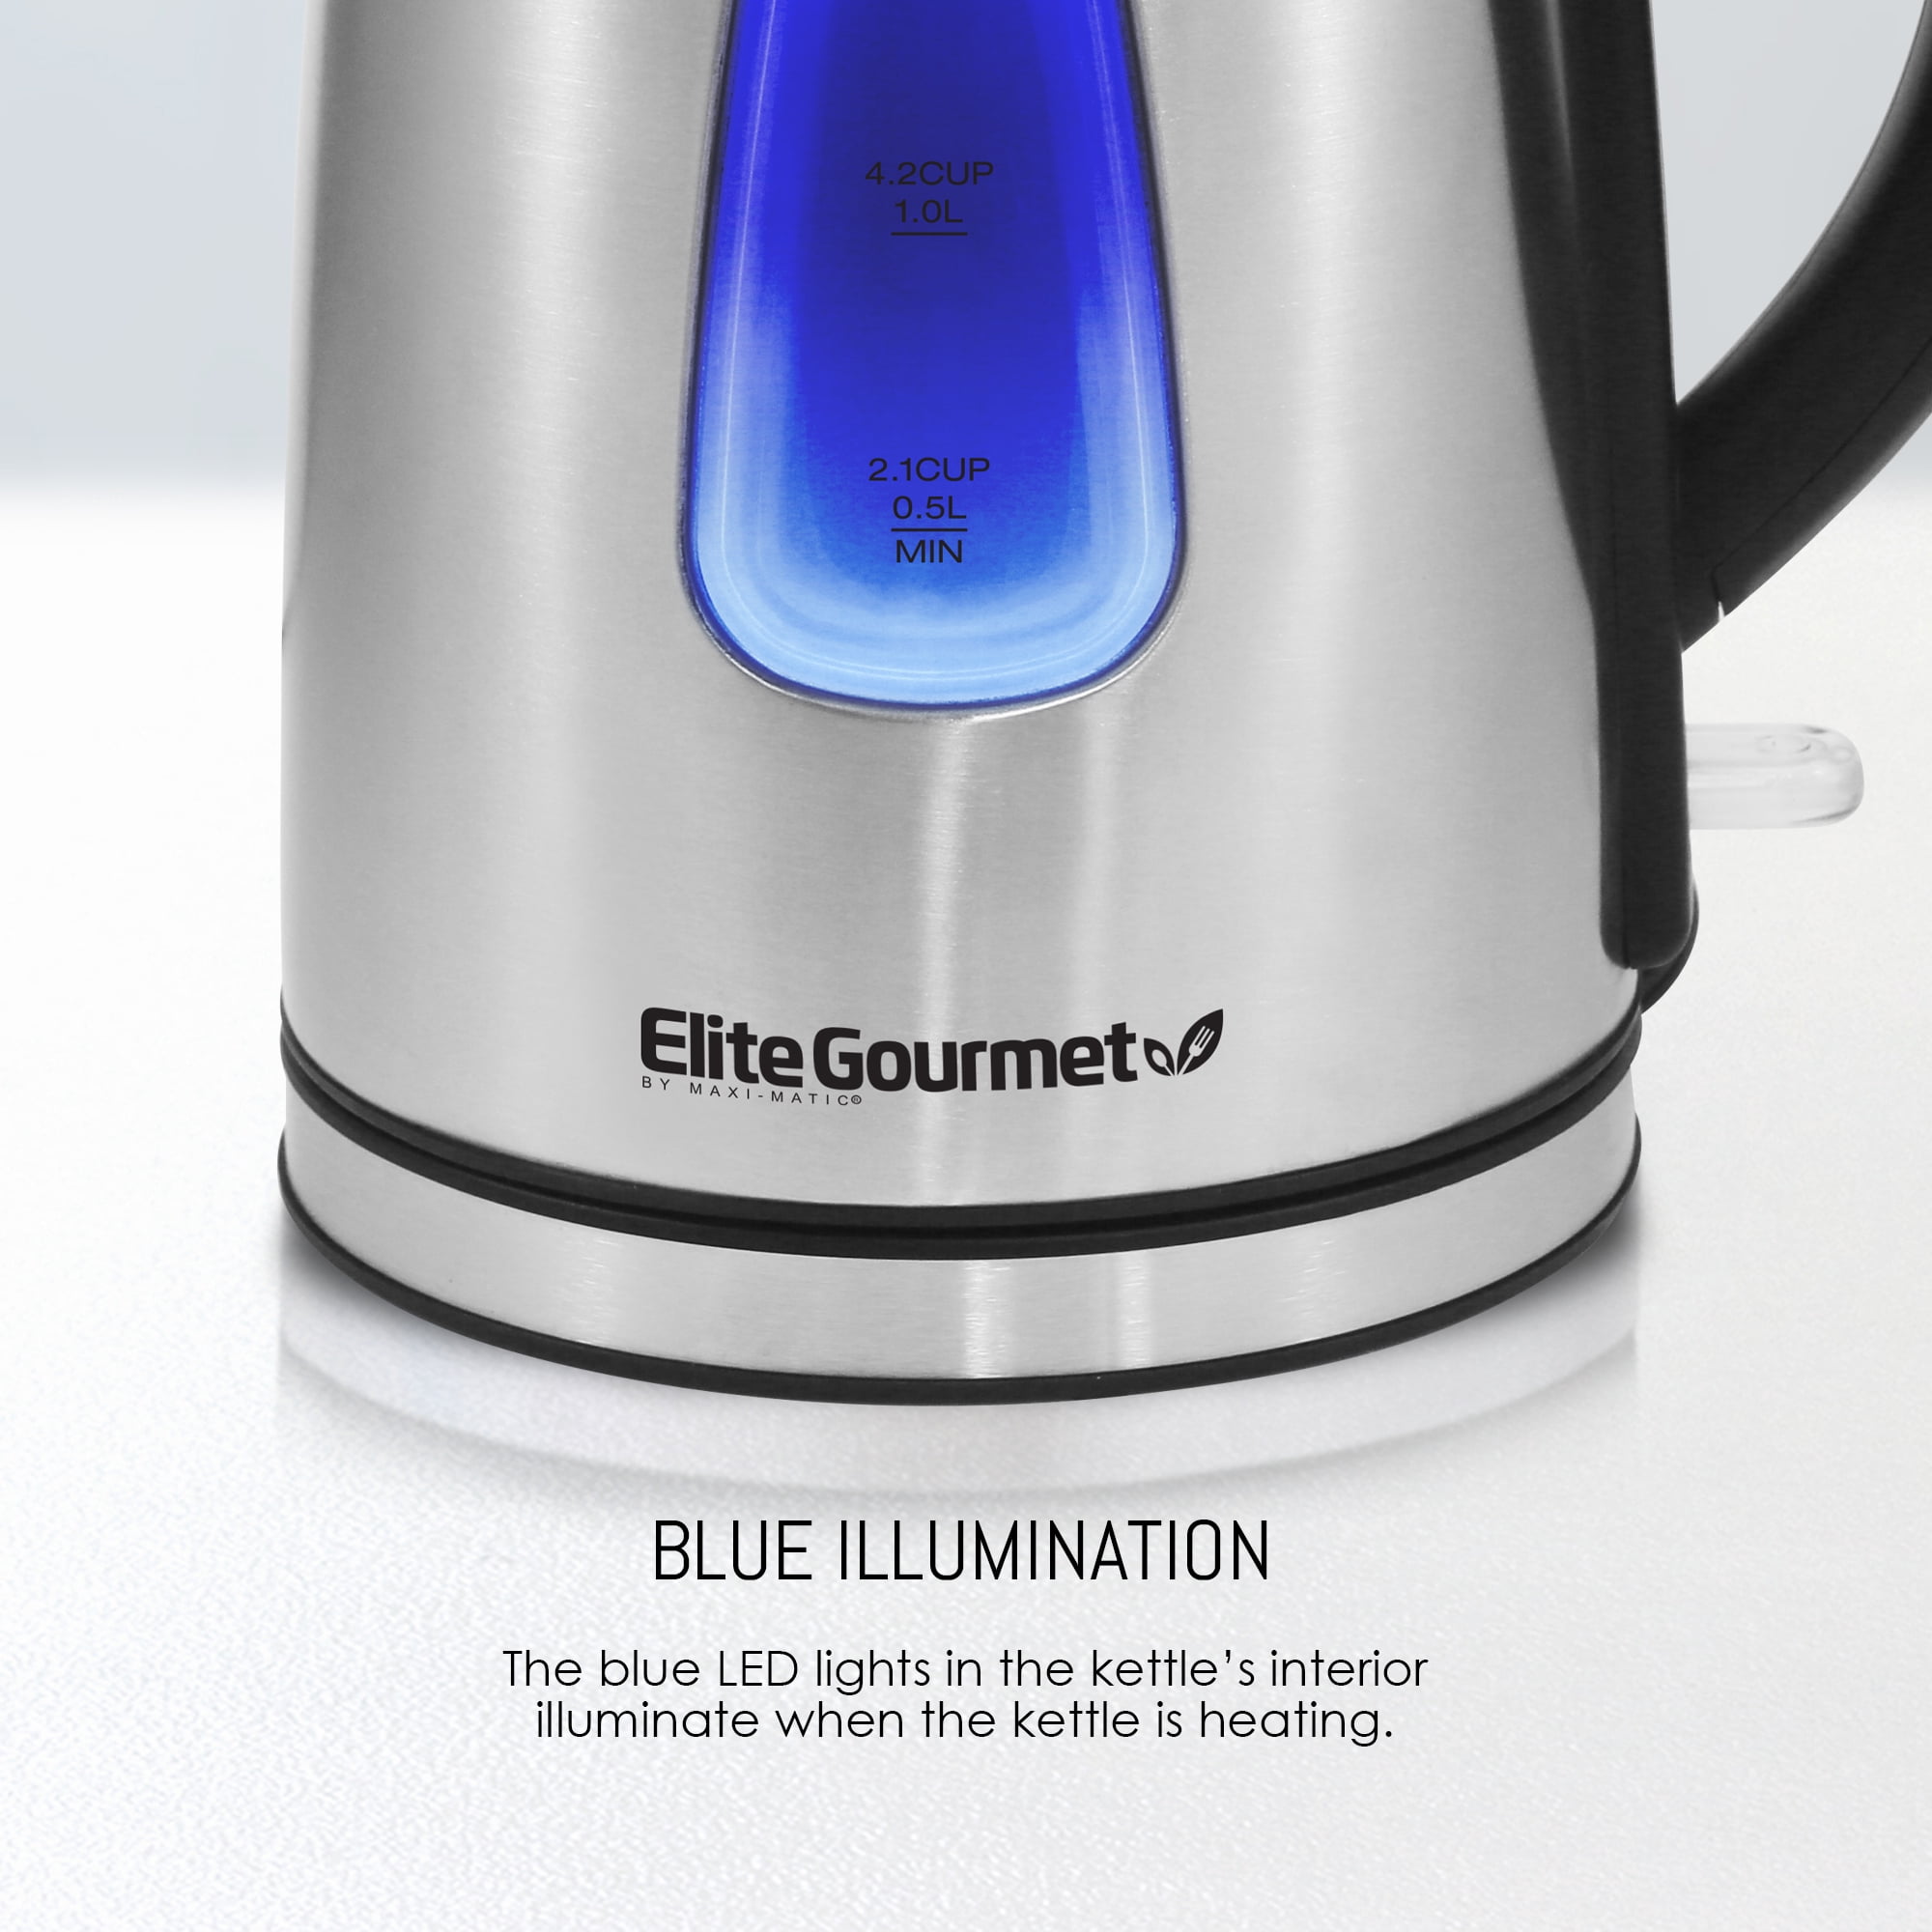 Elite Platinum 7-Cup Cordless Stainless Steel Electric Kettle with  Automatic Shut-off EKT-1271 - The Home Depot